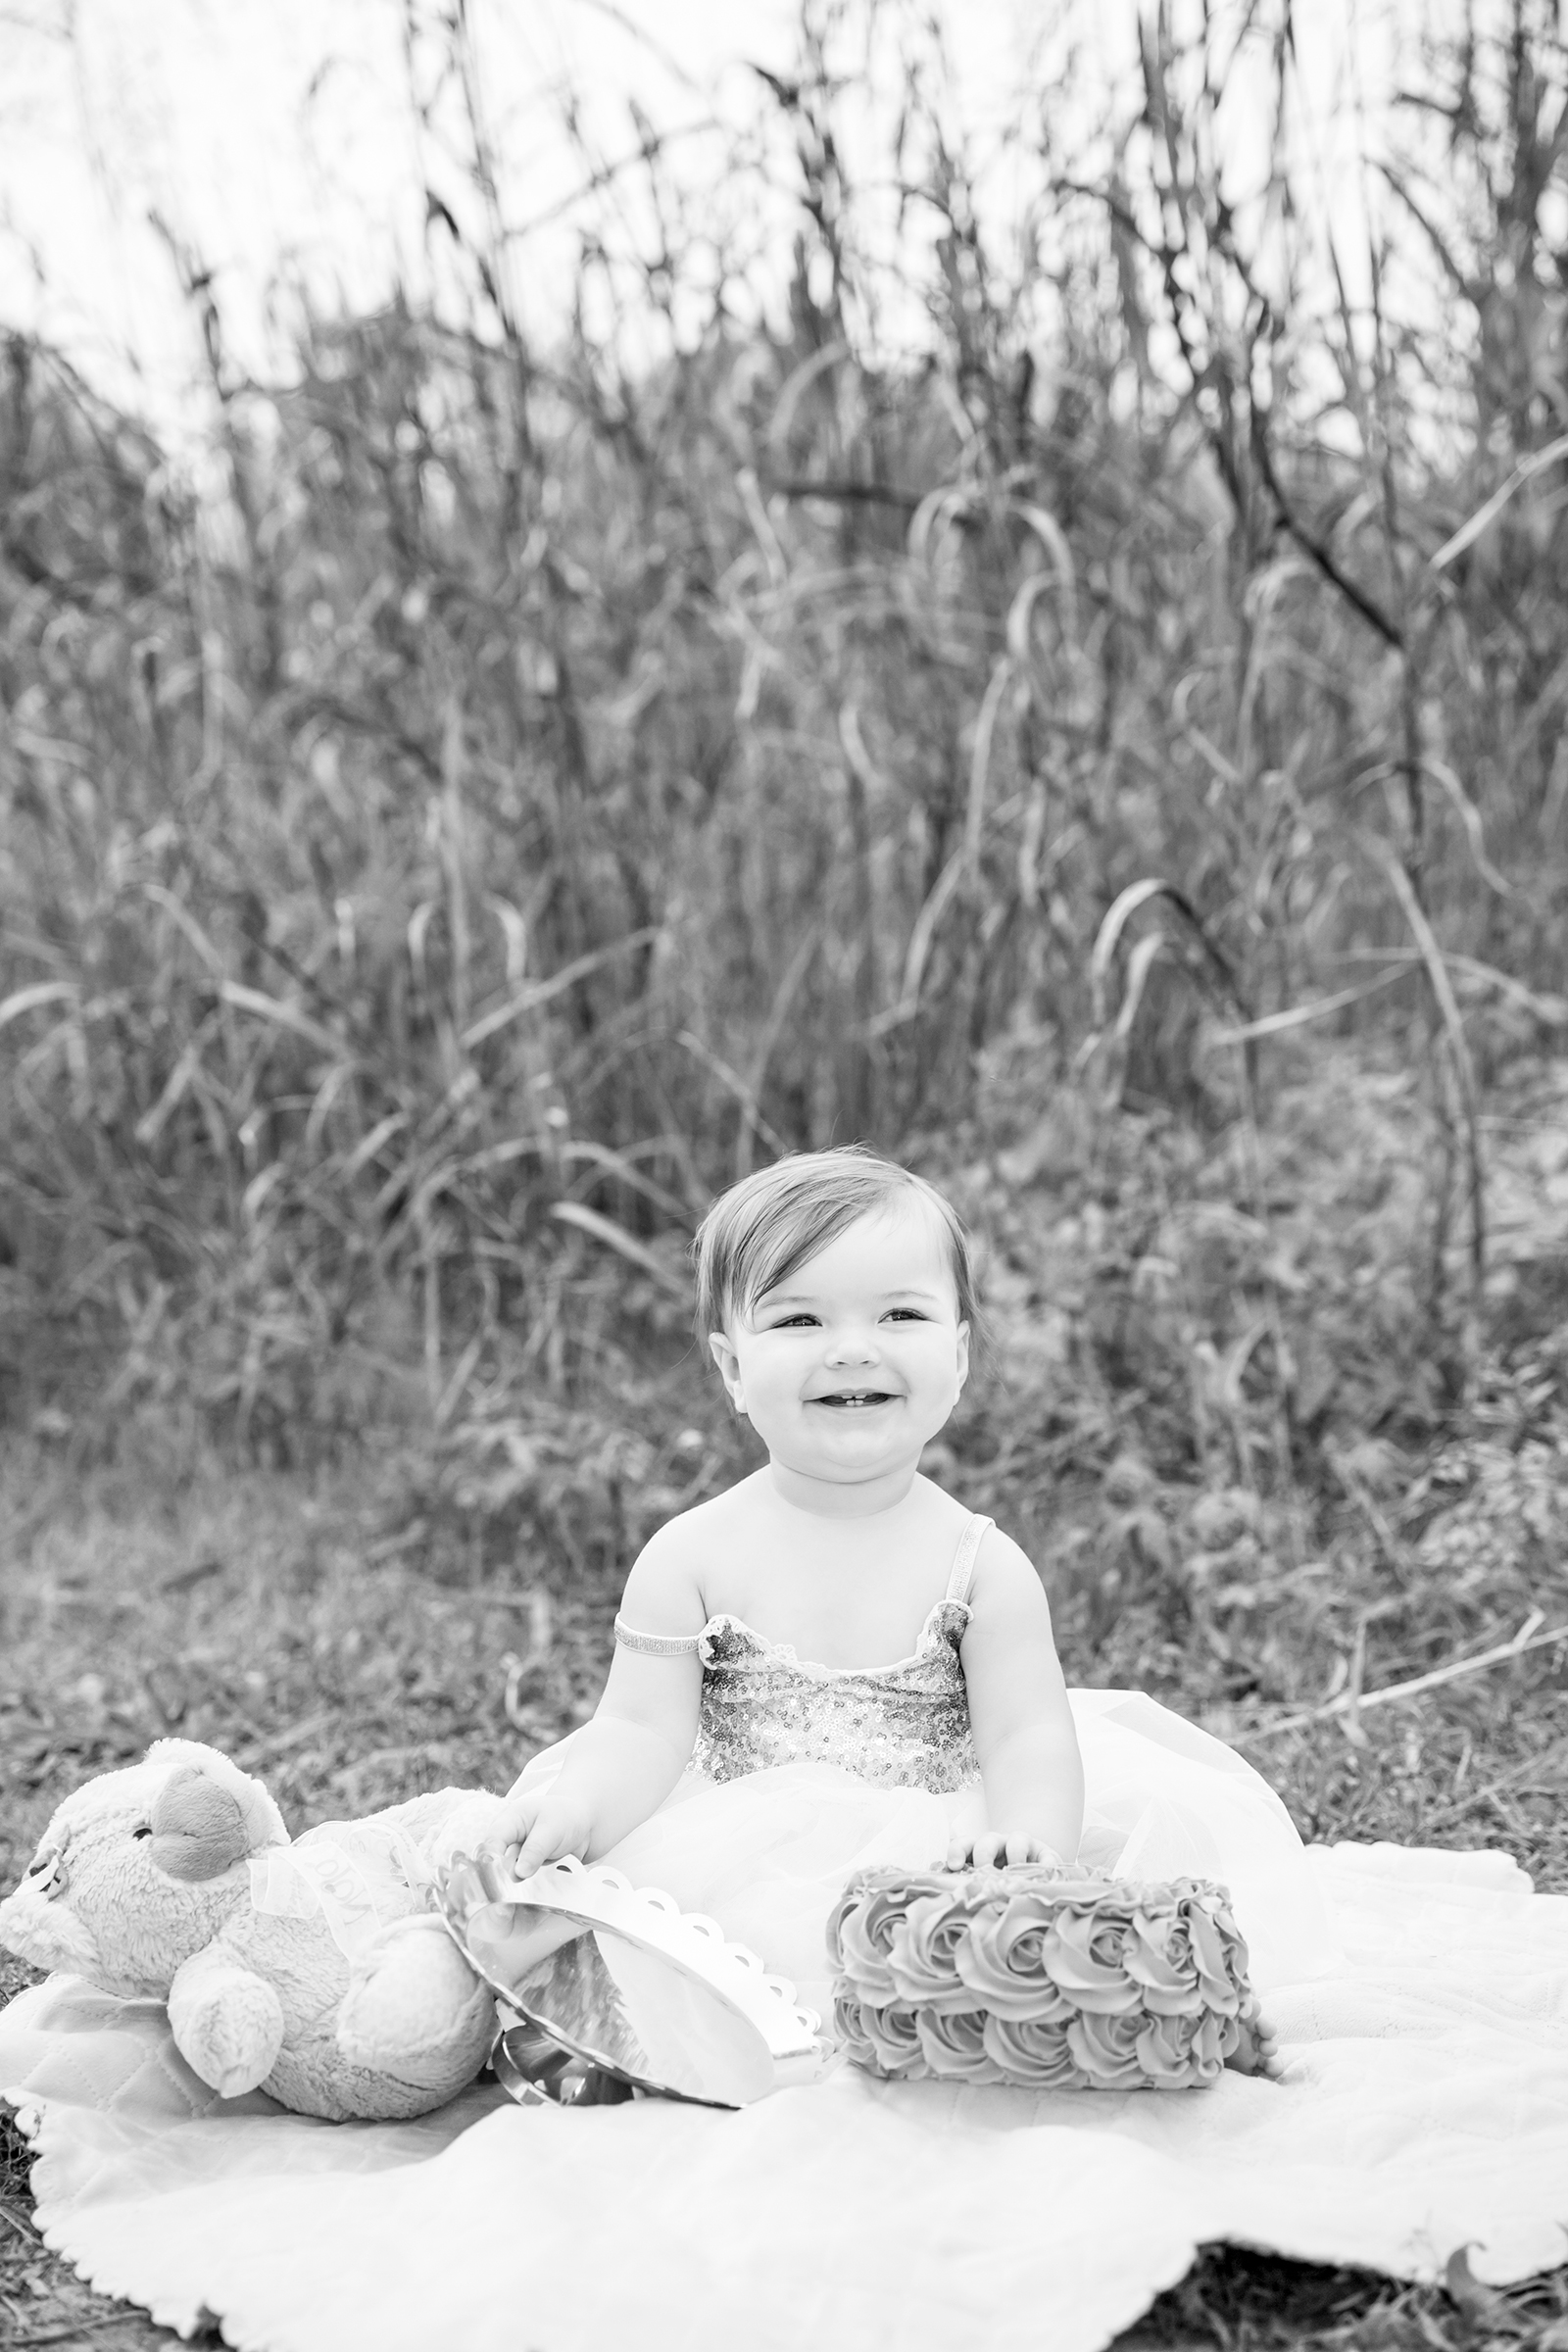 One Year Old Birthday Shoot in Powhatan Virginia  - Image Property of www.j-dphoto.com